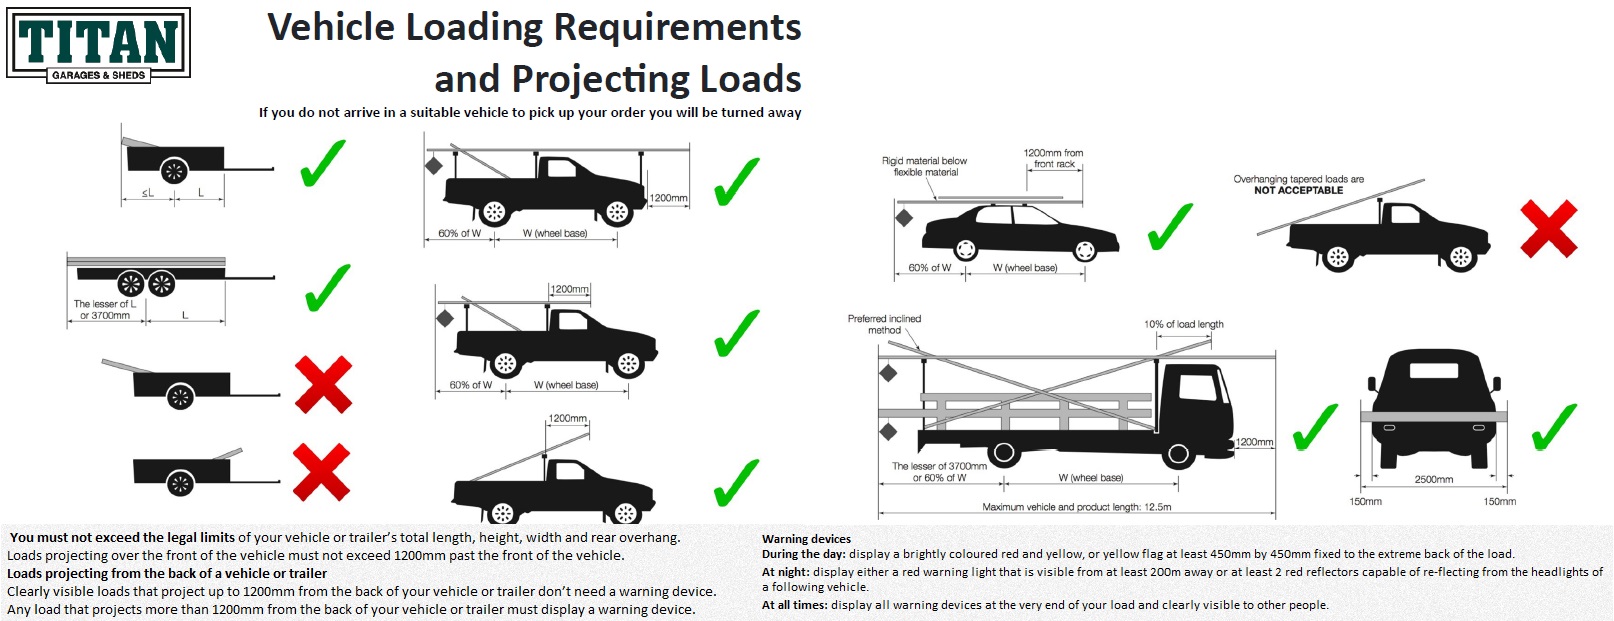 vehicle loading requirements